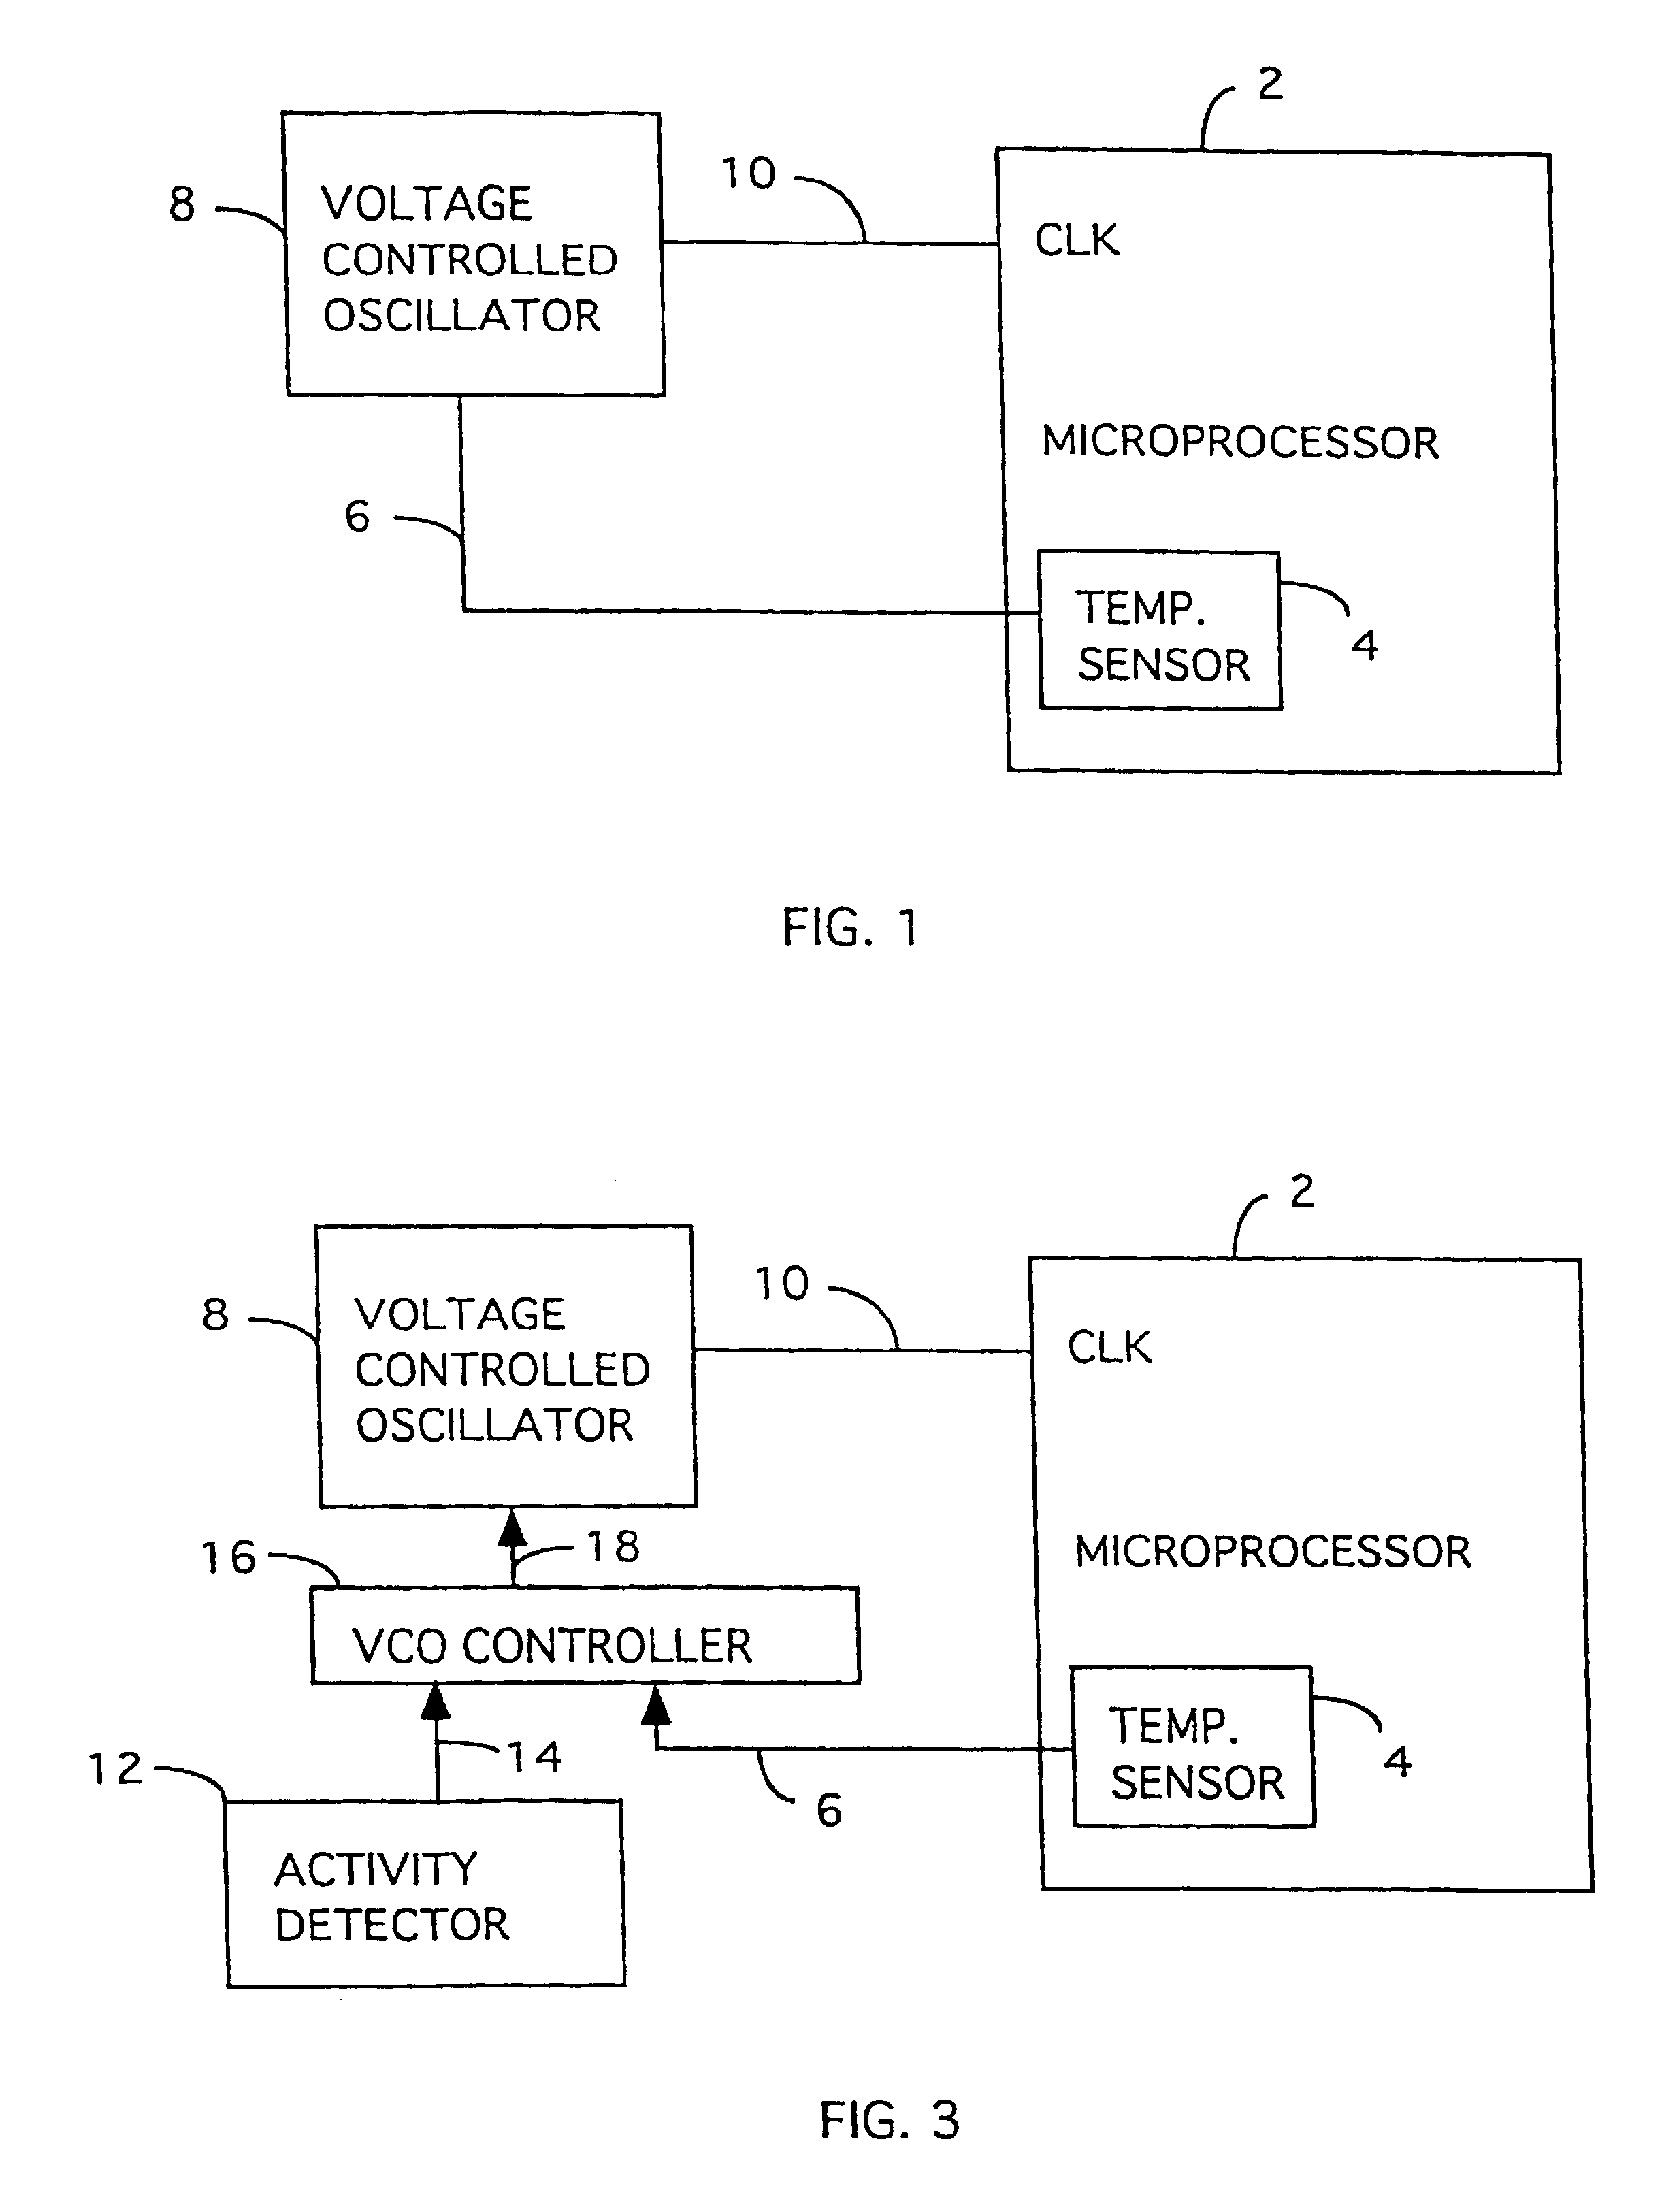 Thermal and power management for computer systems